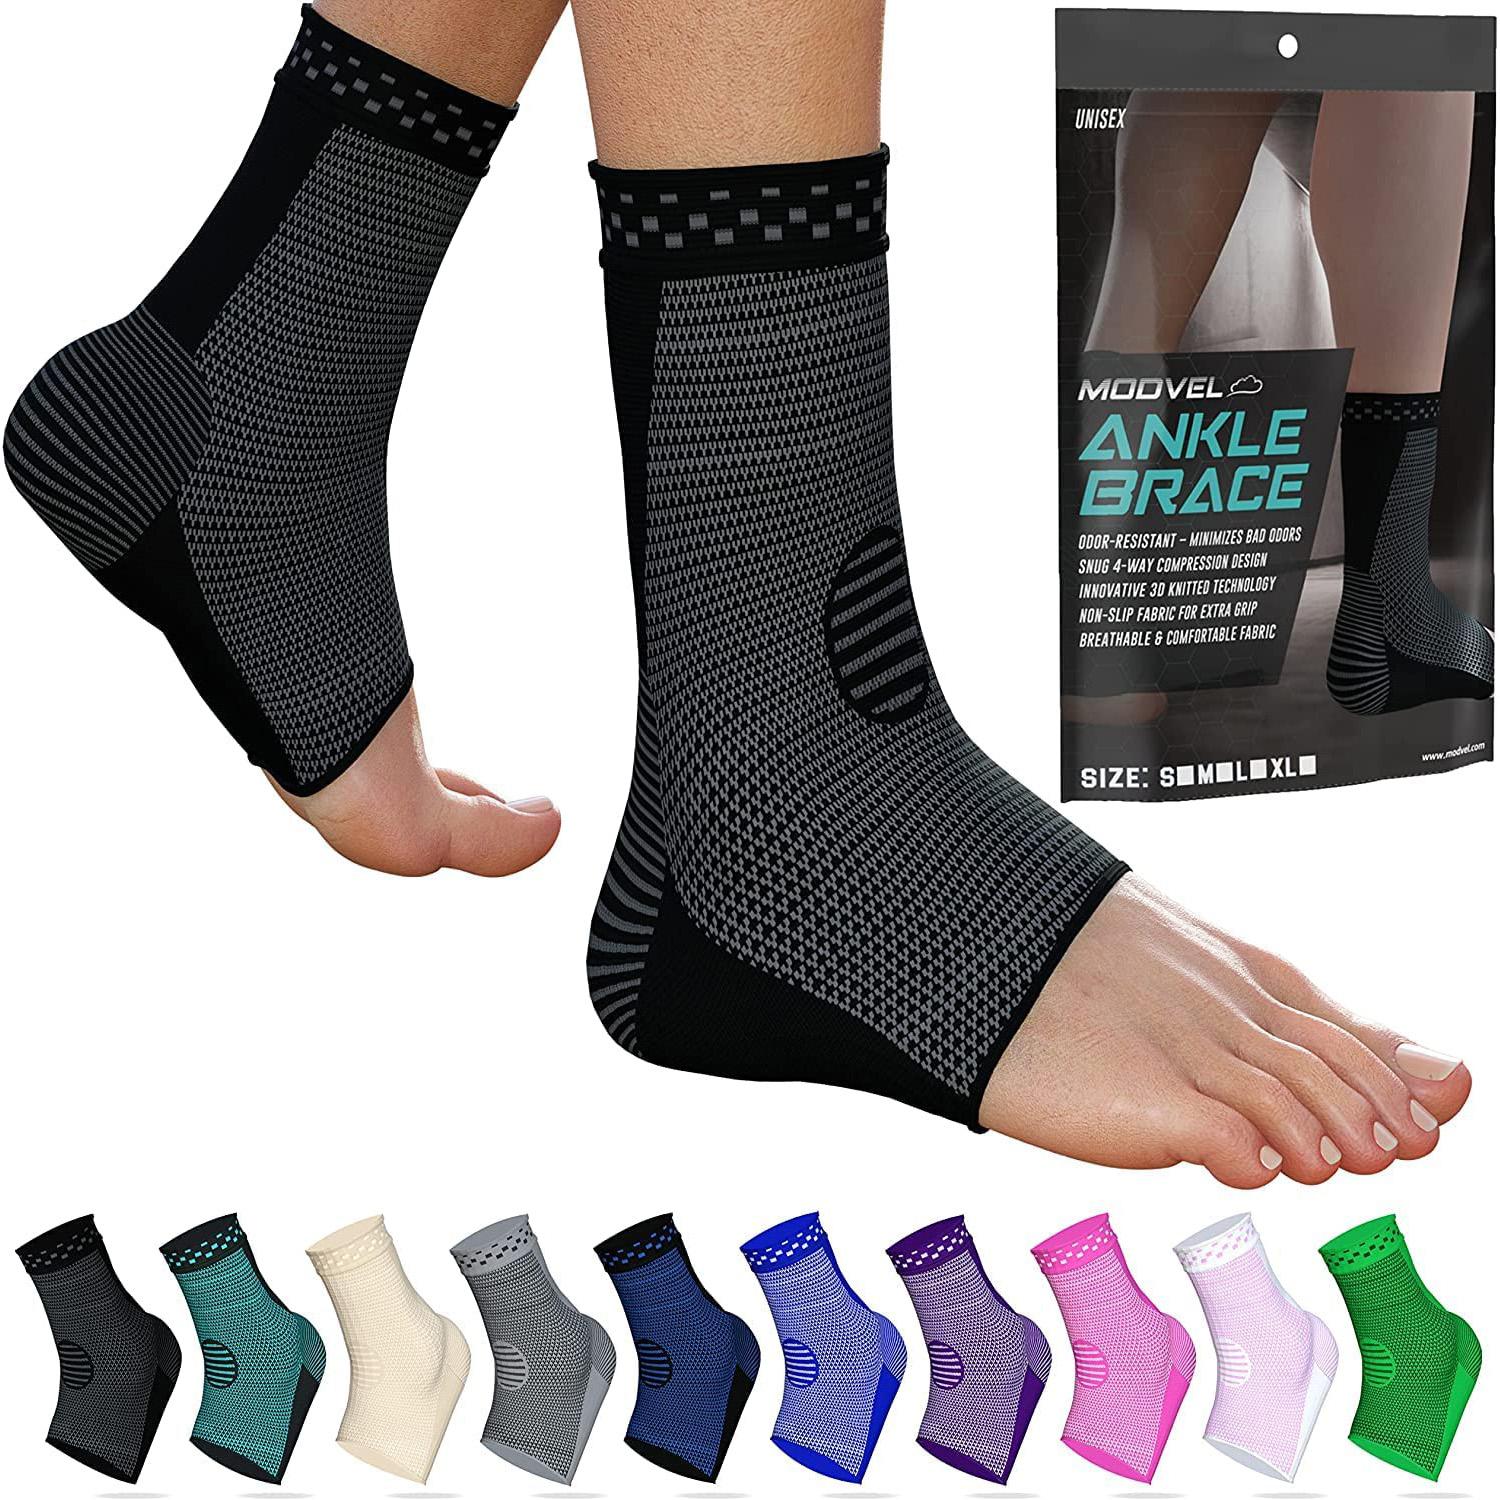 Ankle Brace Compression Sleeve 2 Pack for $9.48